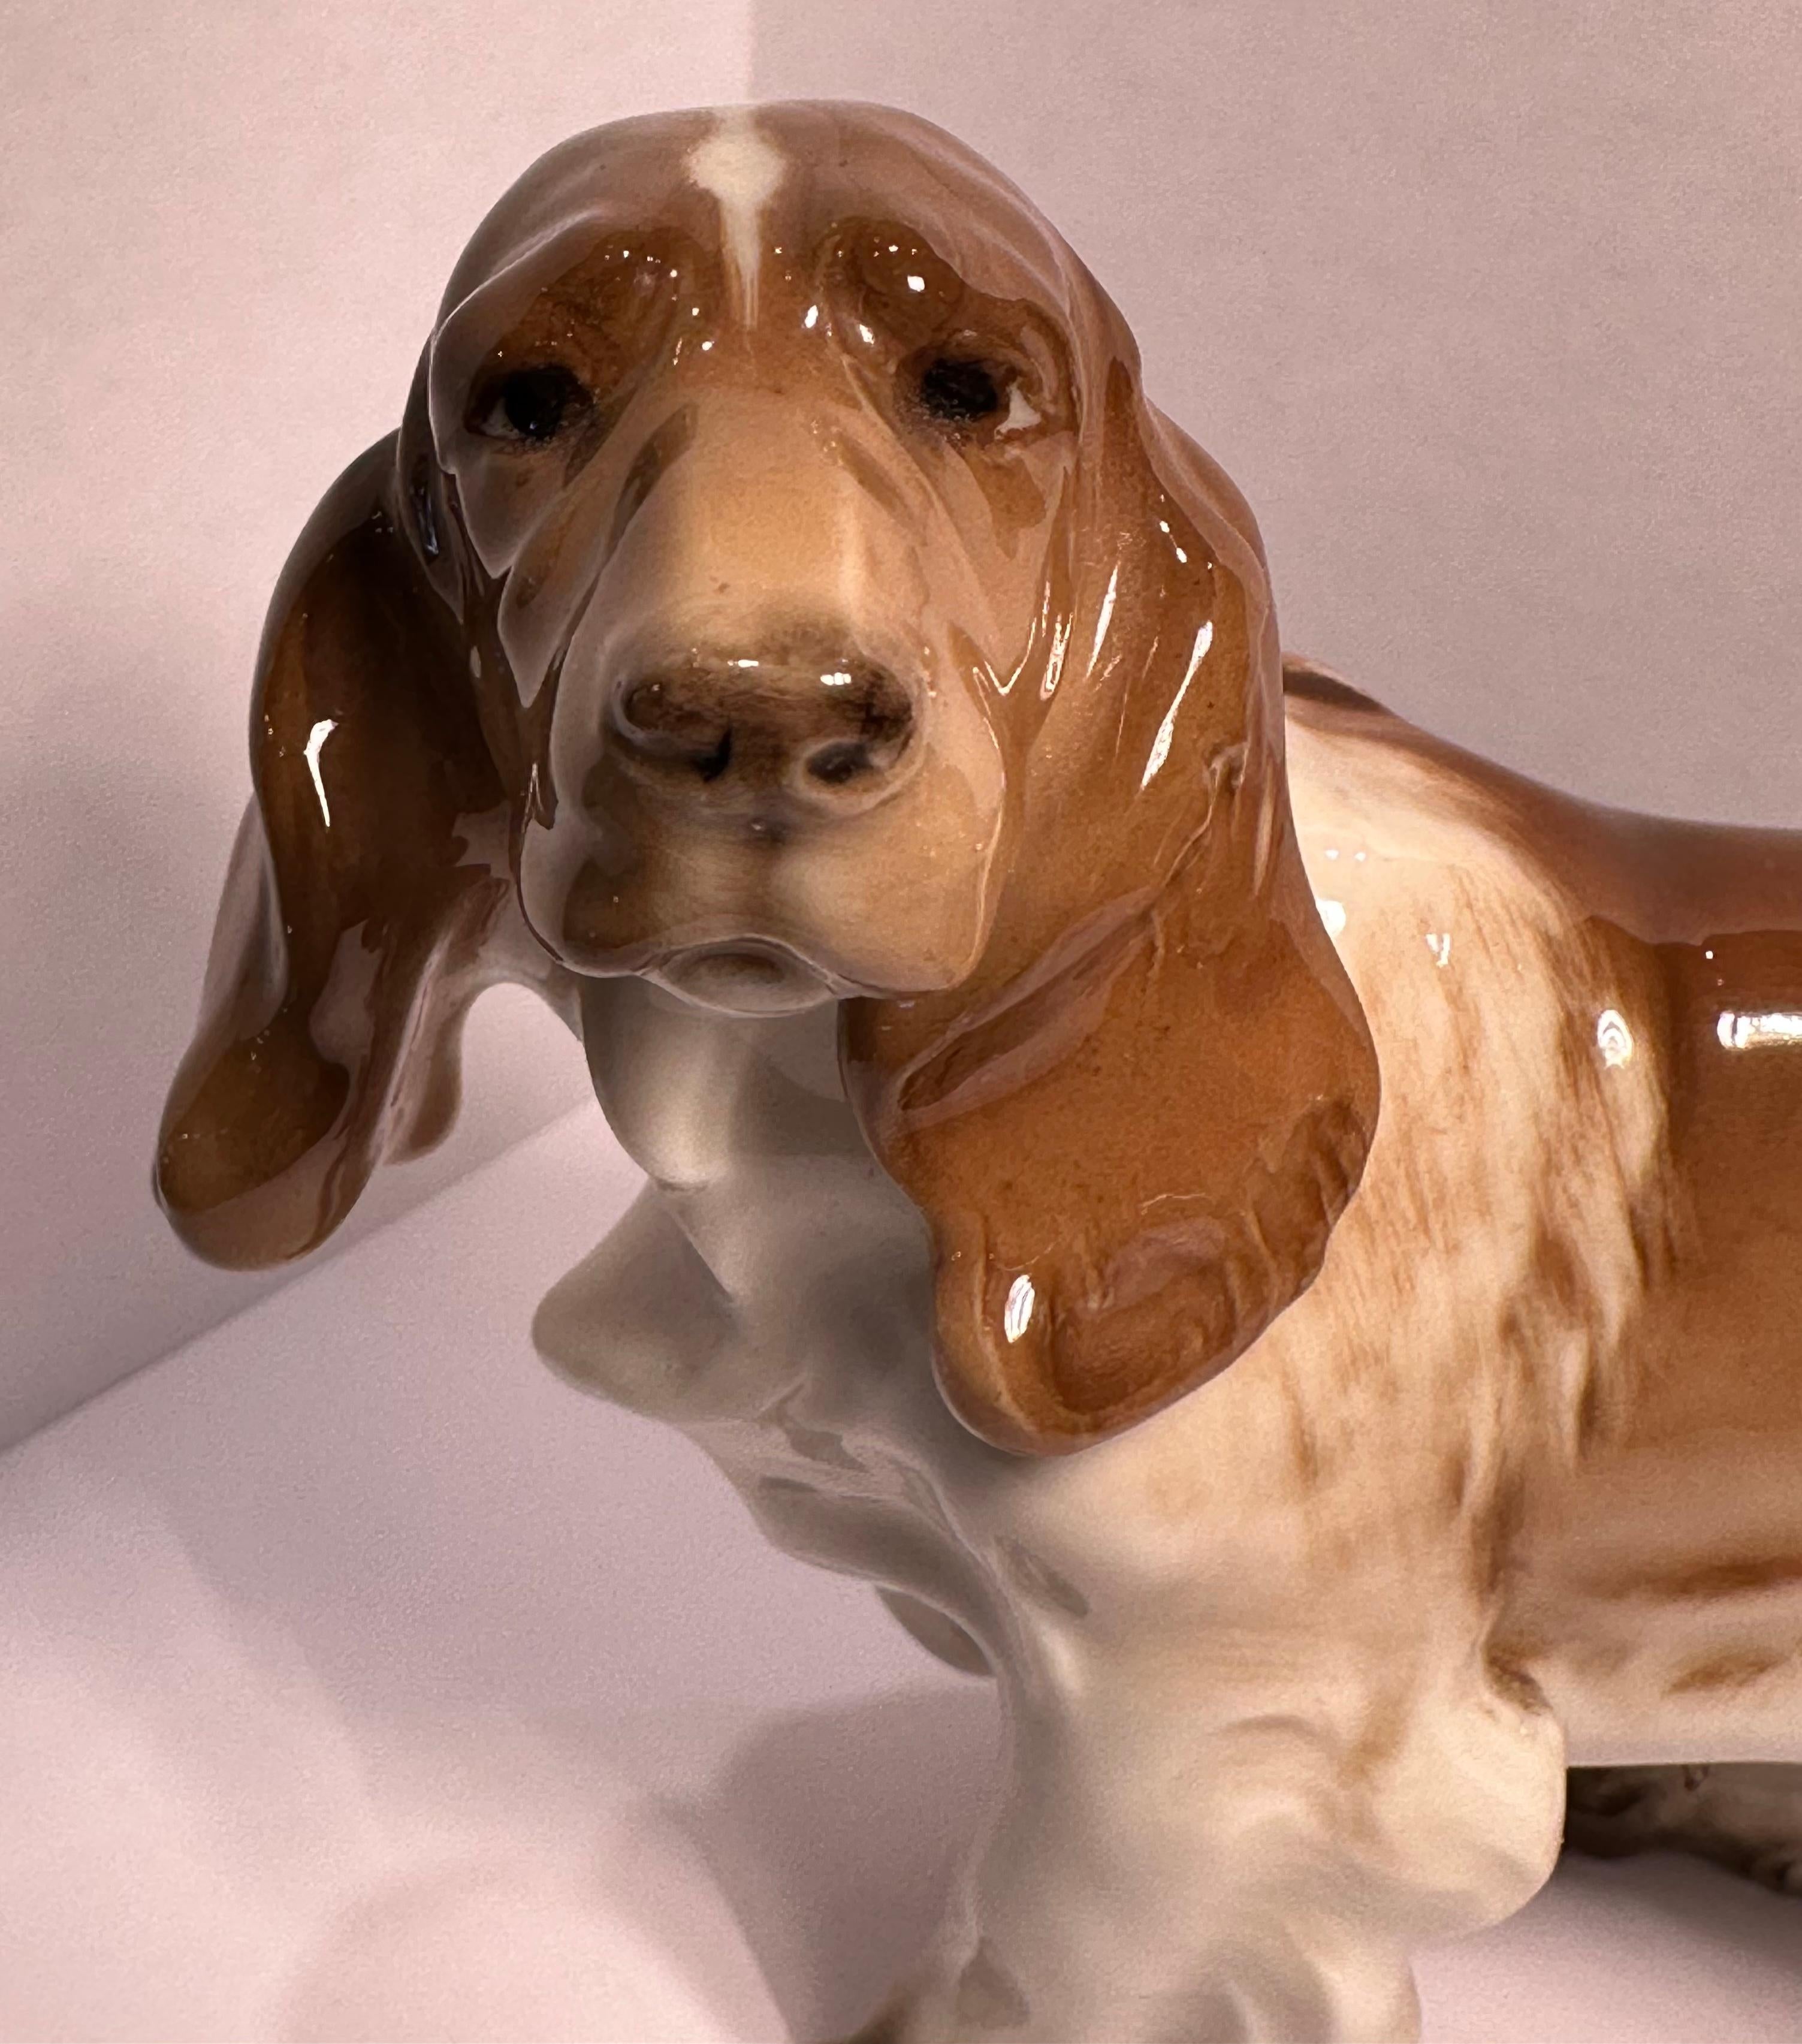 Vintage hand made and hand painted in Germany retired Hutschenreuther porcelain Cocker Spaniel dog figurine. 

Wonderful life-like detailing, poised perfectly with realistic coloring and high glaze finish. It is stamped with the Hutschenreuther logo